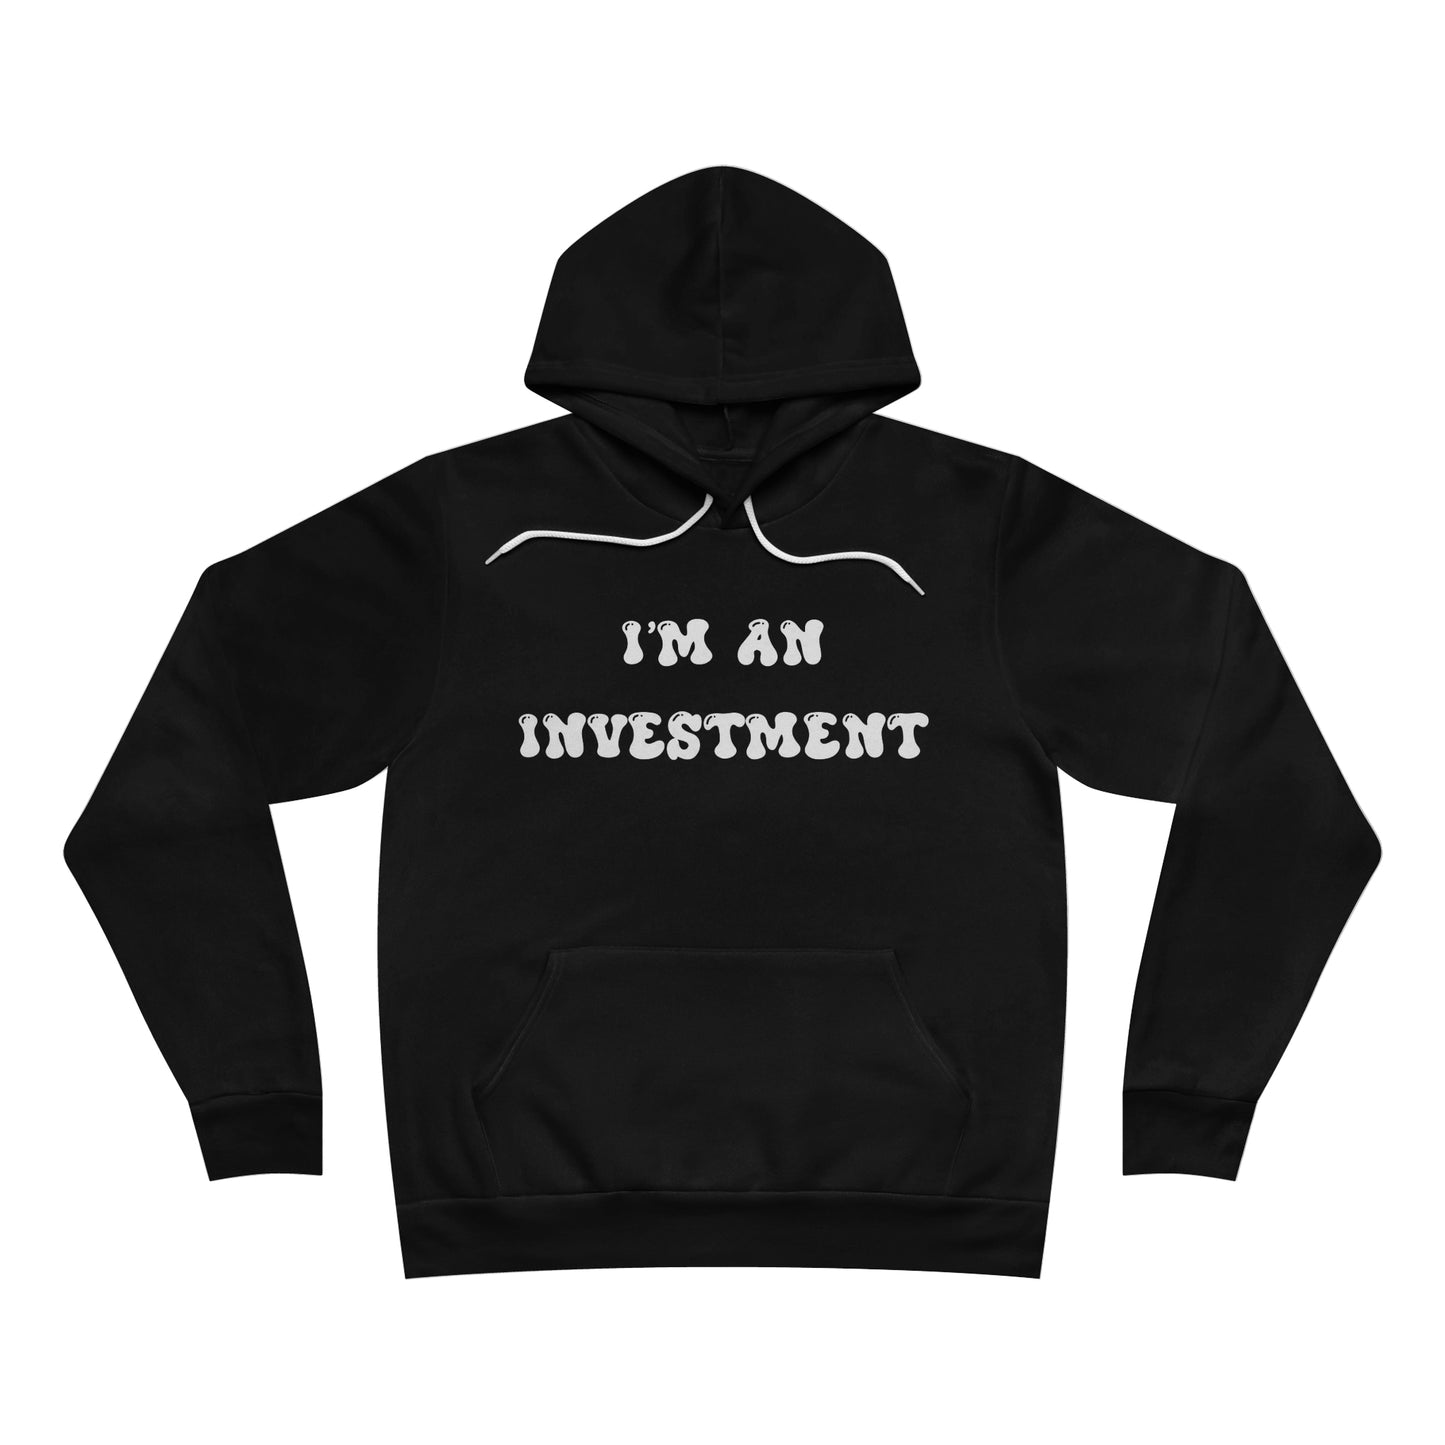 I'm an investment